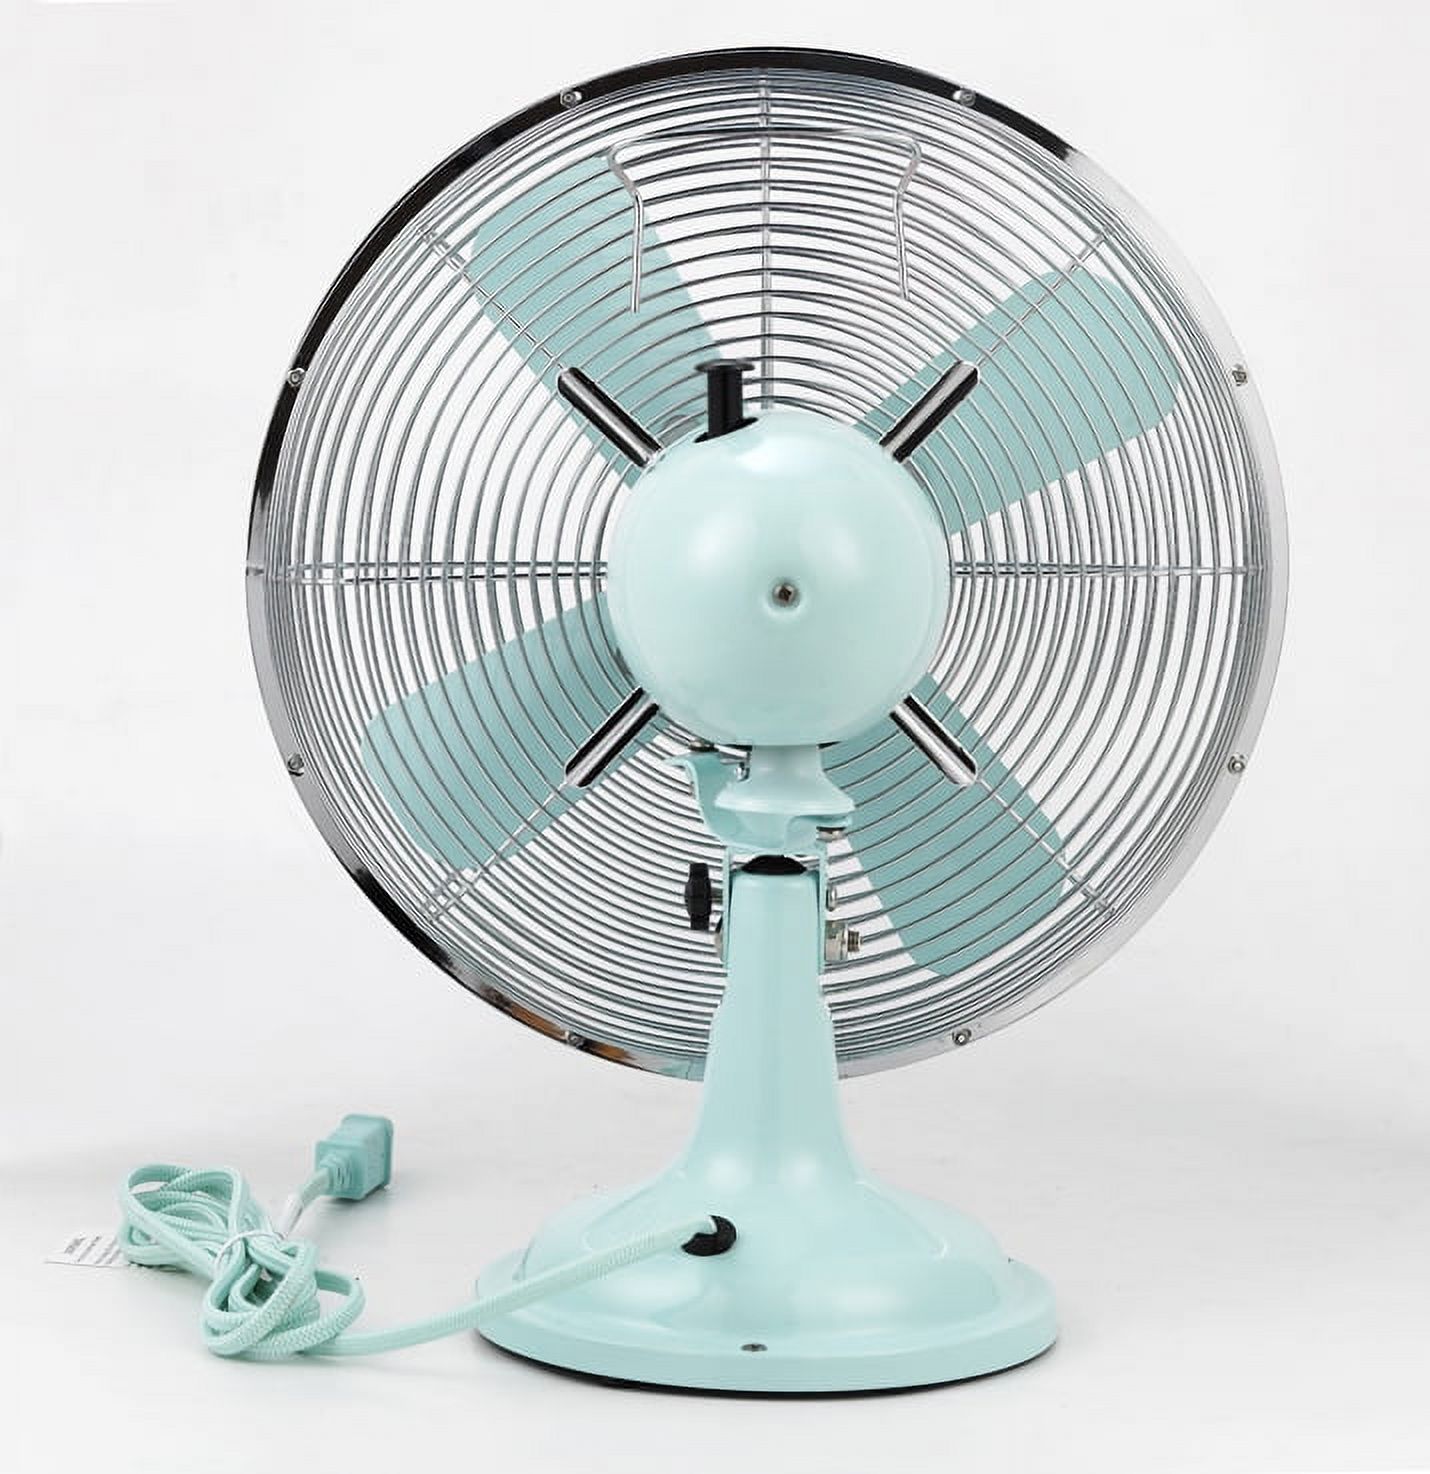 Better Homes & Gardens New 12 inch Retro 3-Speed Metal Tilted-Head Oscillation Table Fan Mint - image 2 of 8